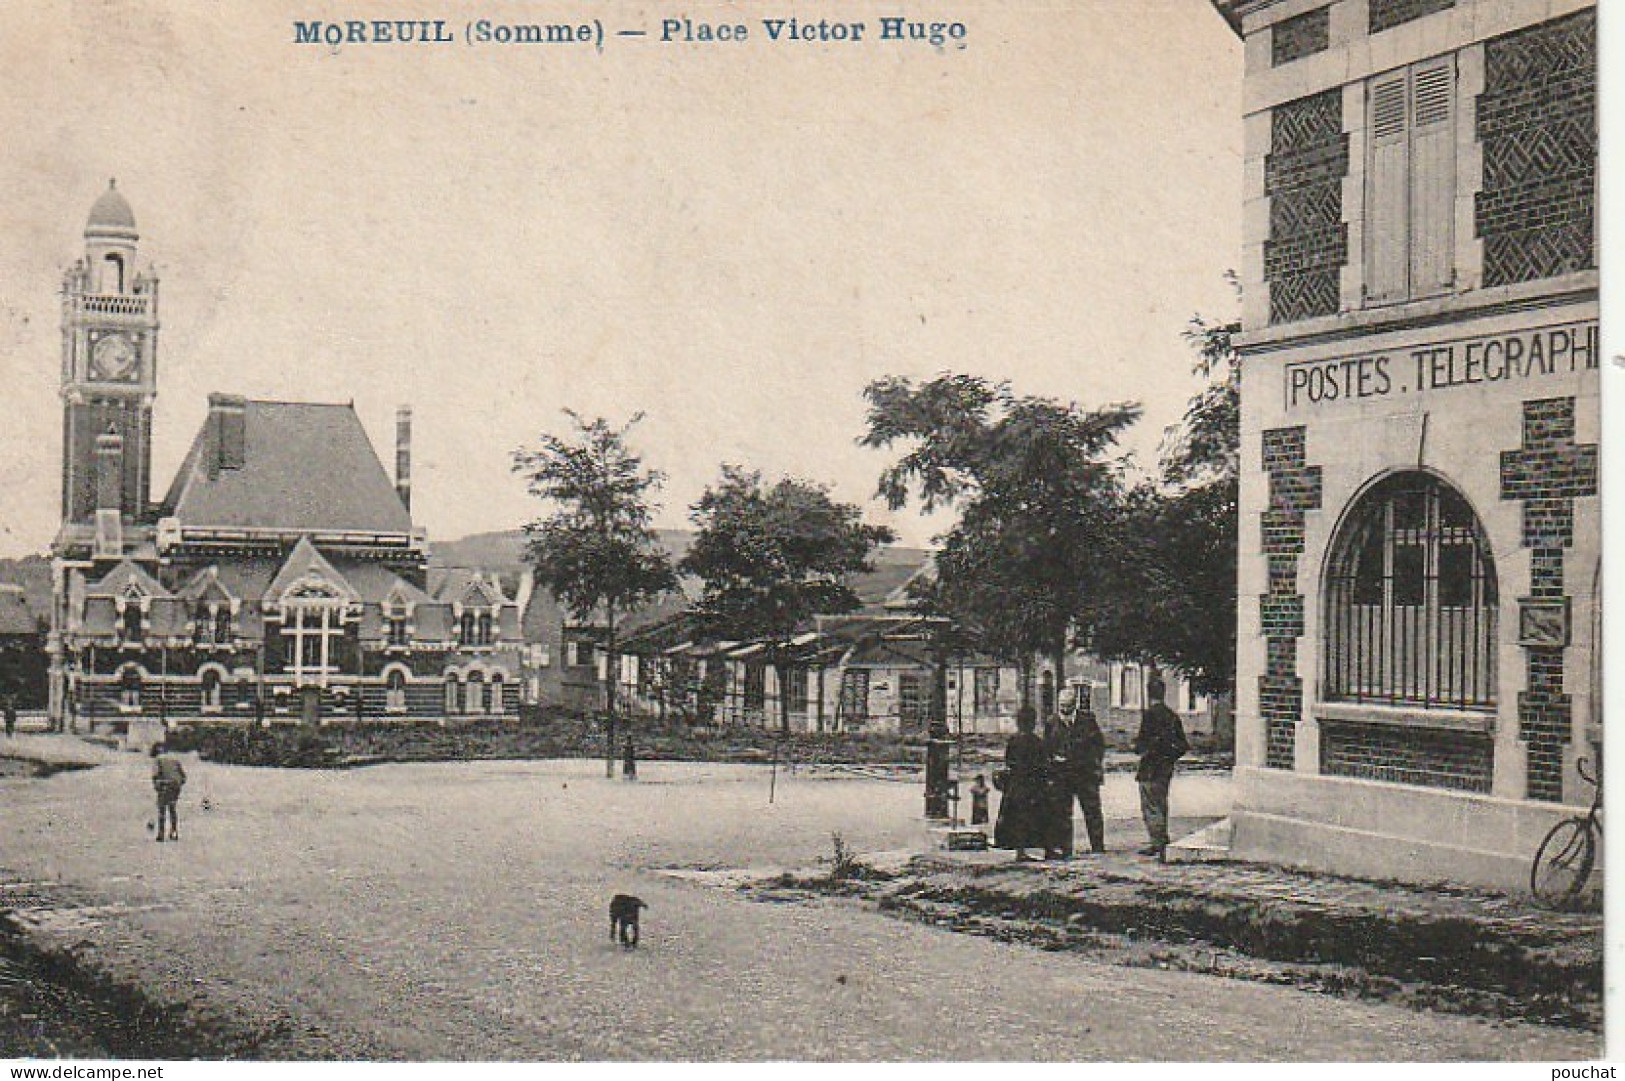 Z++ 9-(80) MOREUIL - PLACE VICTOR HUGO - POSTES , TELEGRAPHES , TELEPHONES - ANIMATION - 2 SCANS - Moreuil